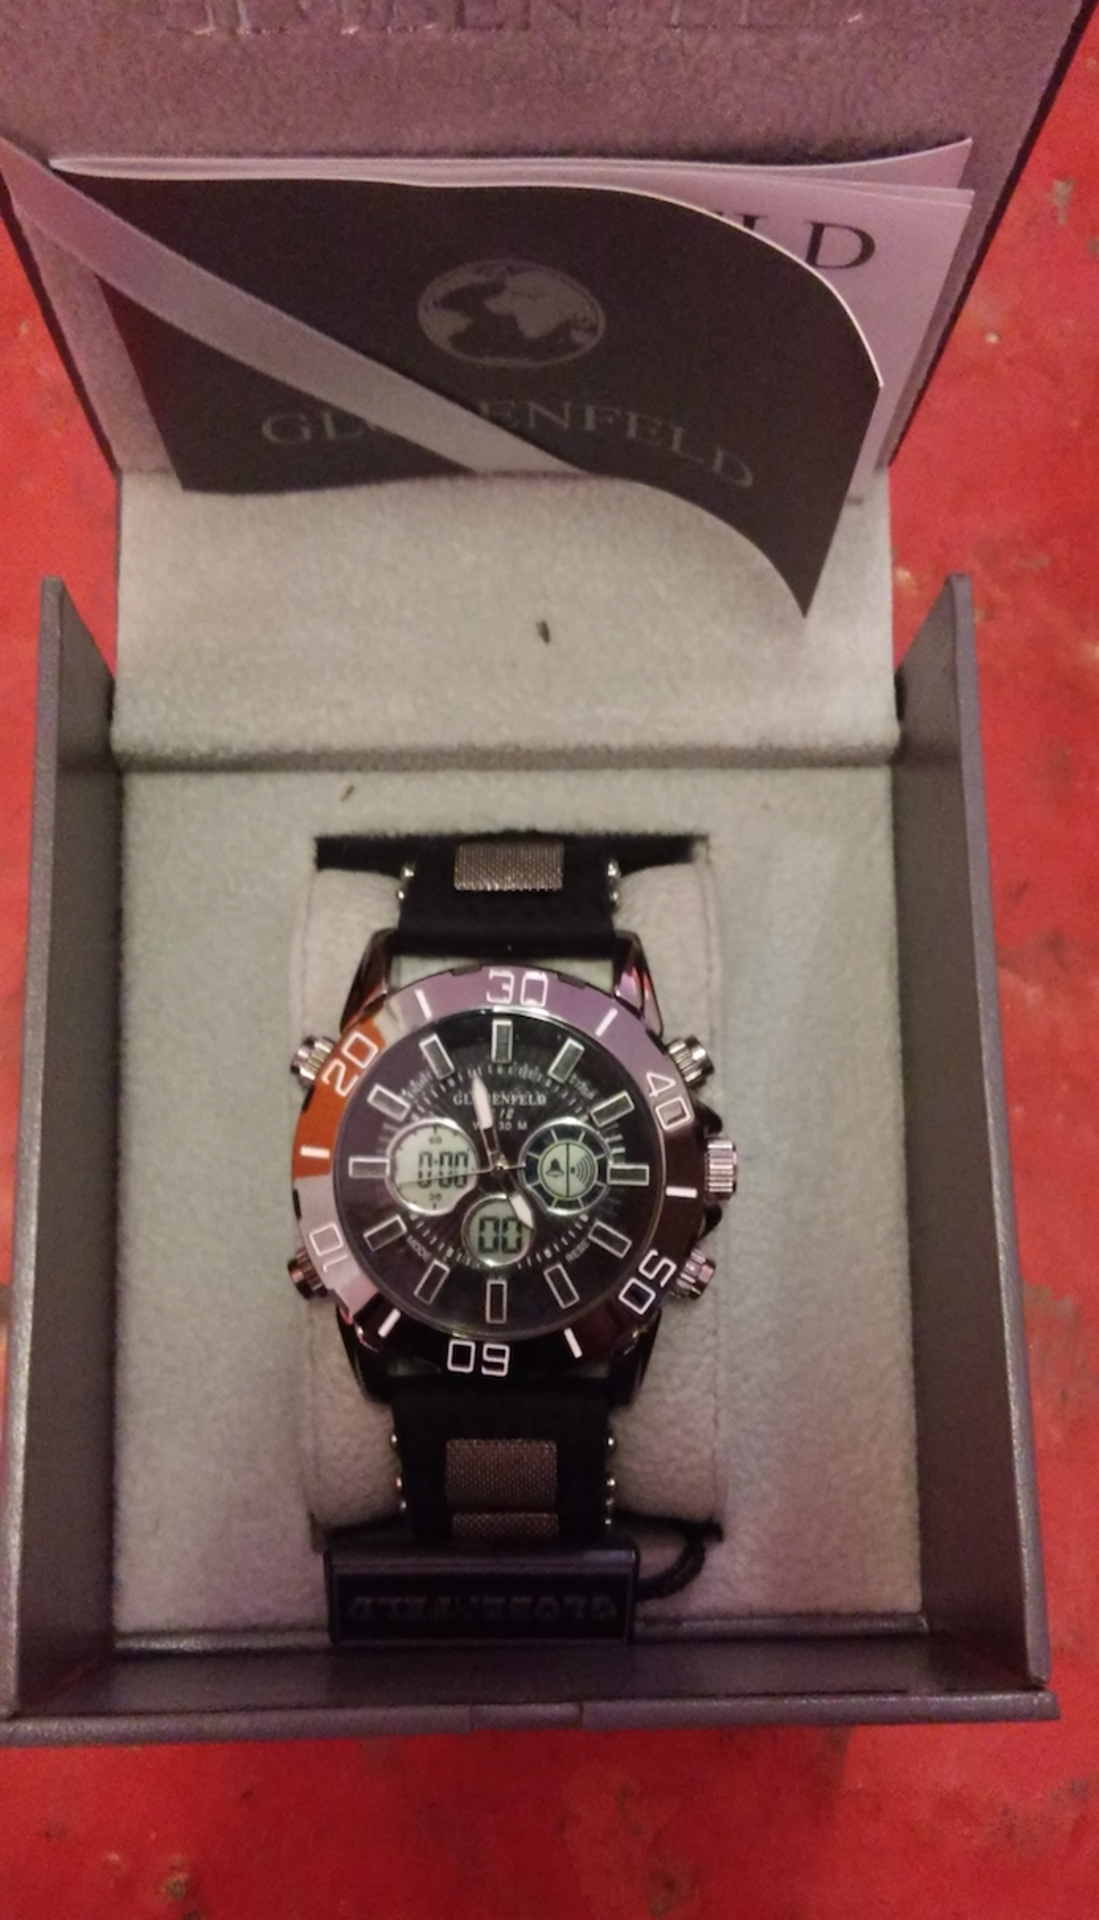 Large Quantity of Designer Watches, Smart Watches, Jewellery, Ray Ban Sunglasses,Make Up and more